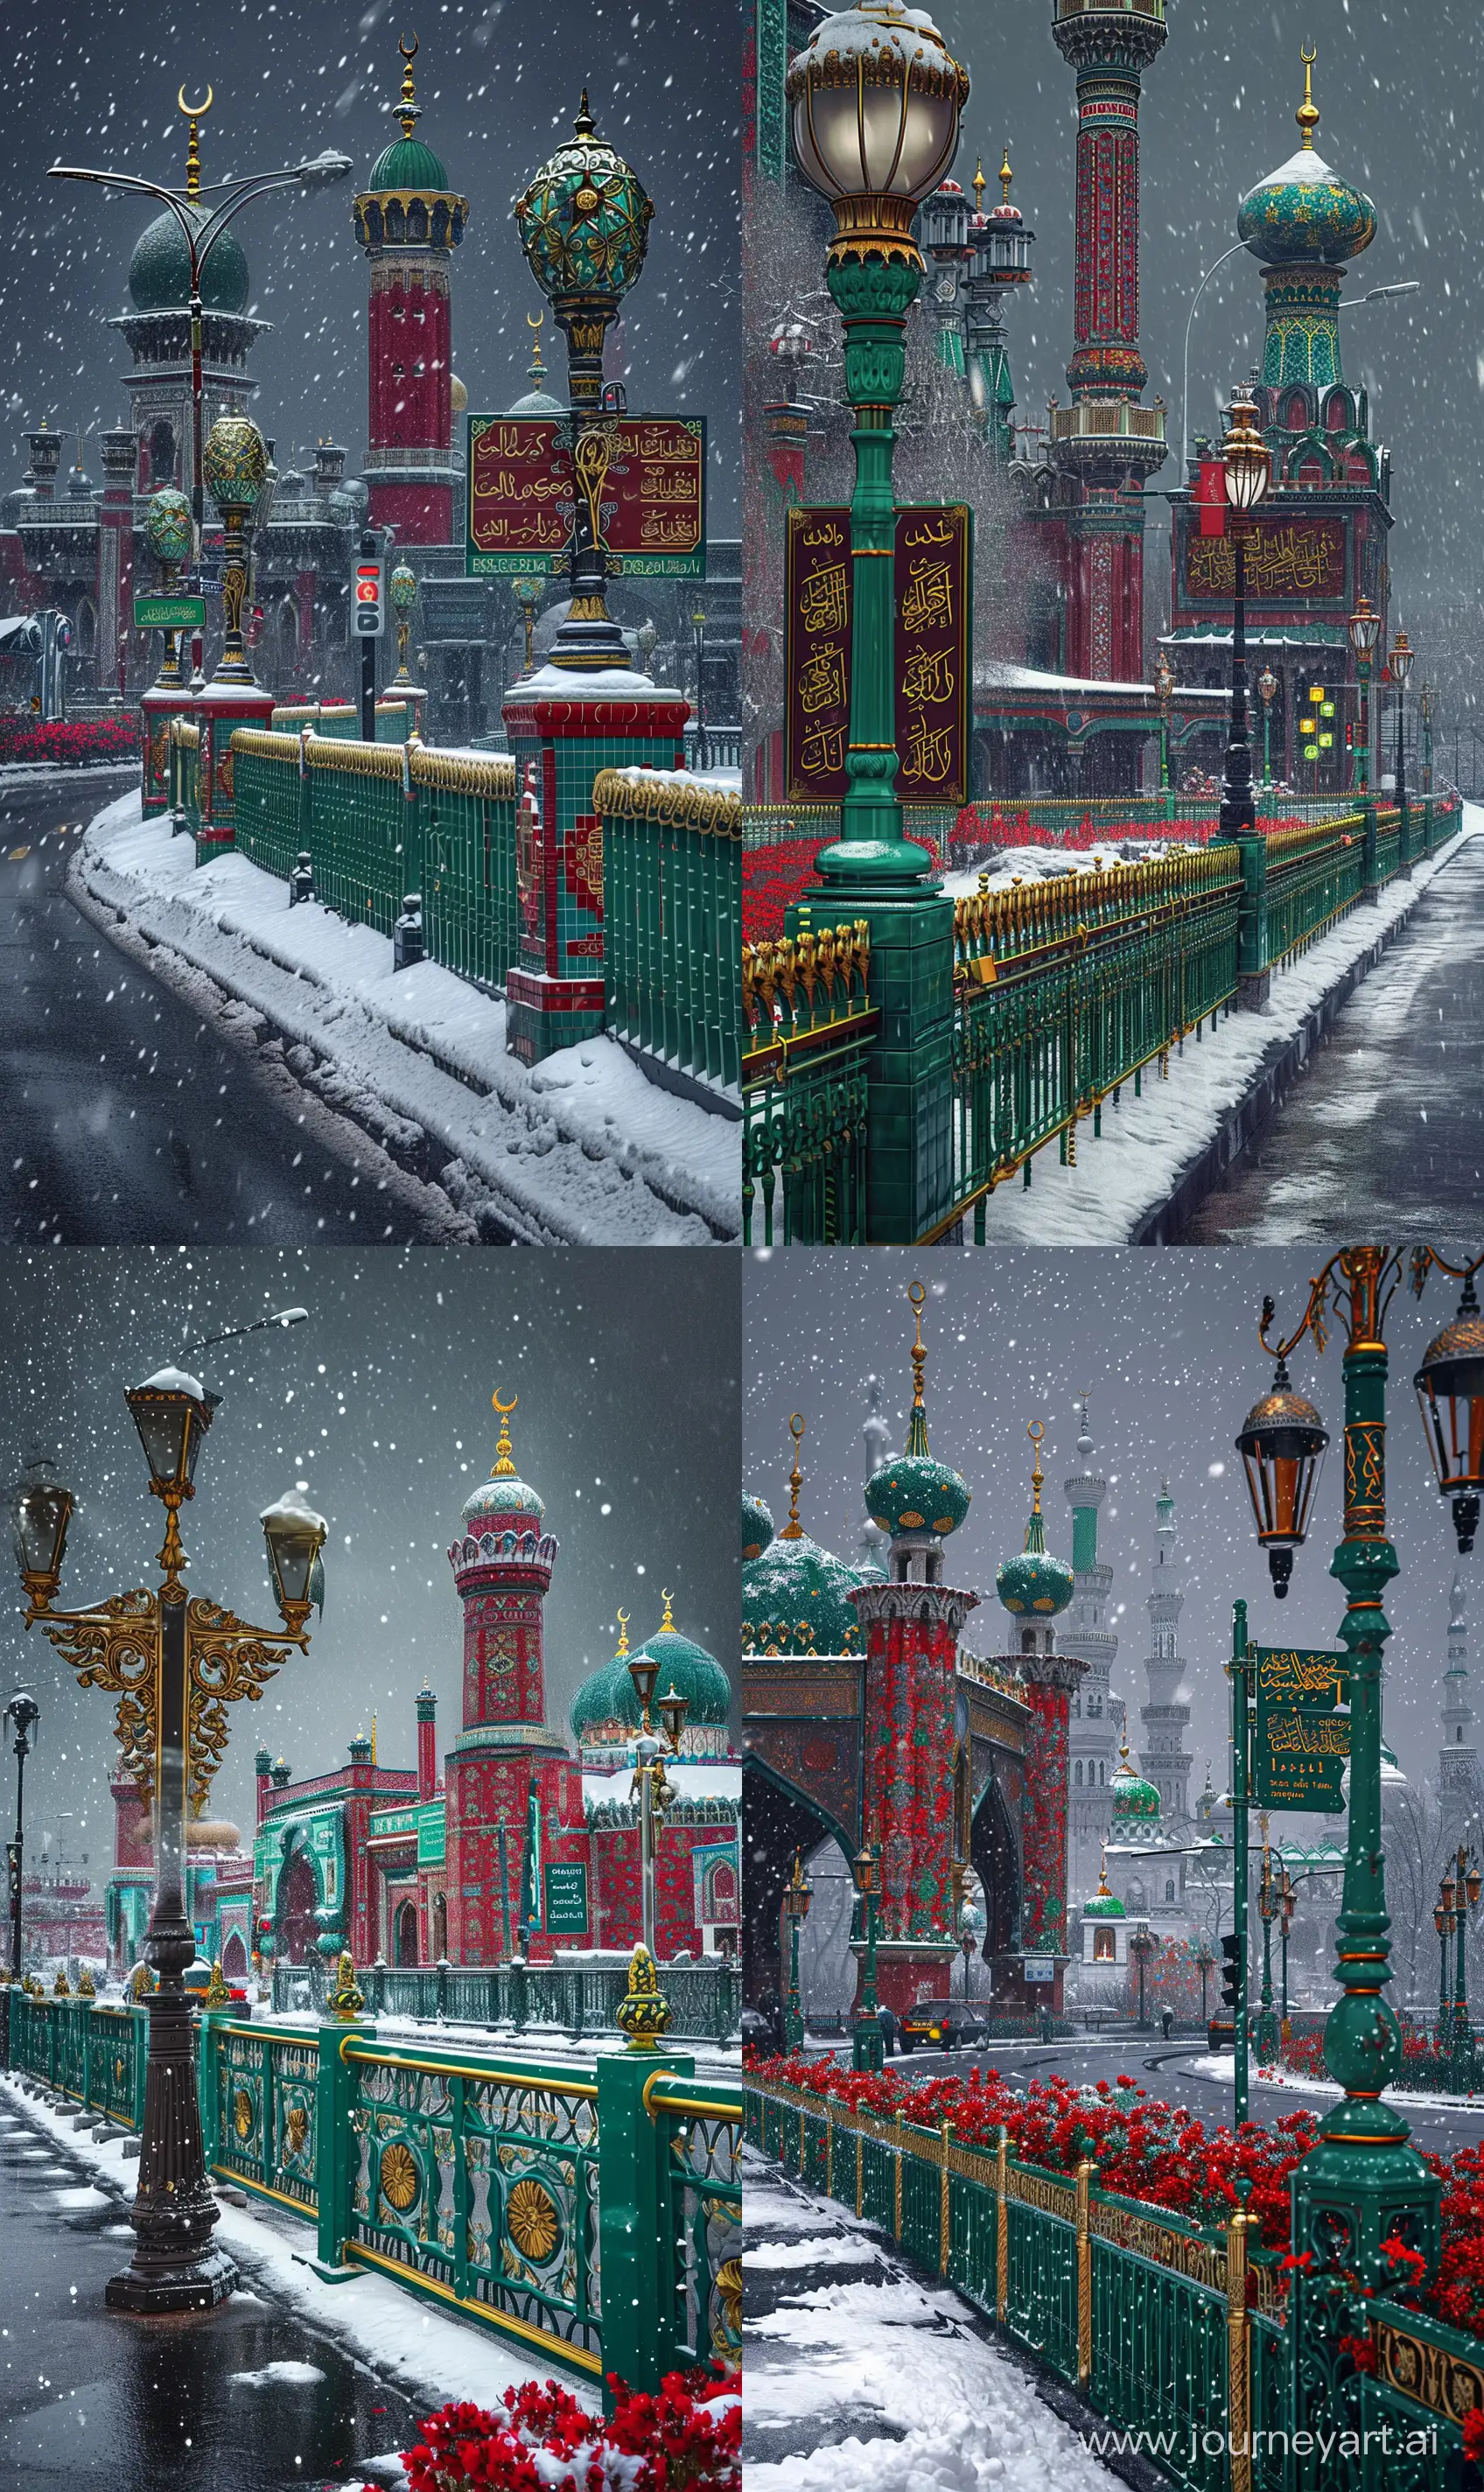 Snowy-Urban-City-Road-with-Islamic-Architecture-and-Ornate-Lamps